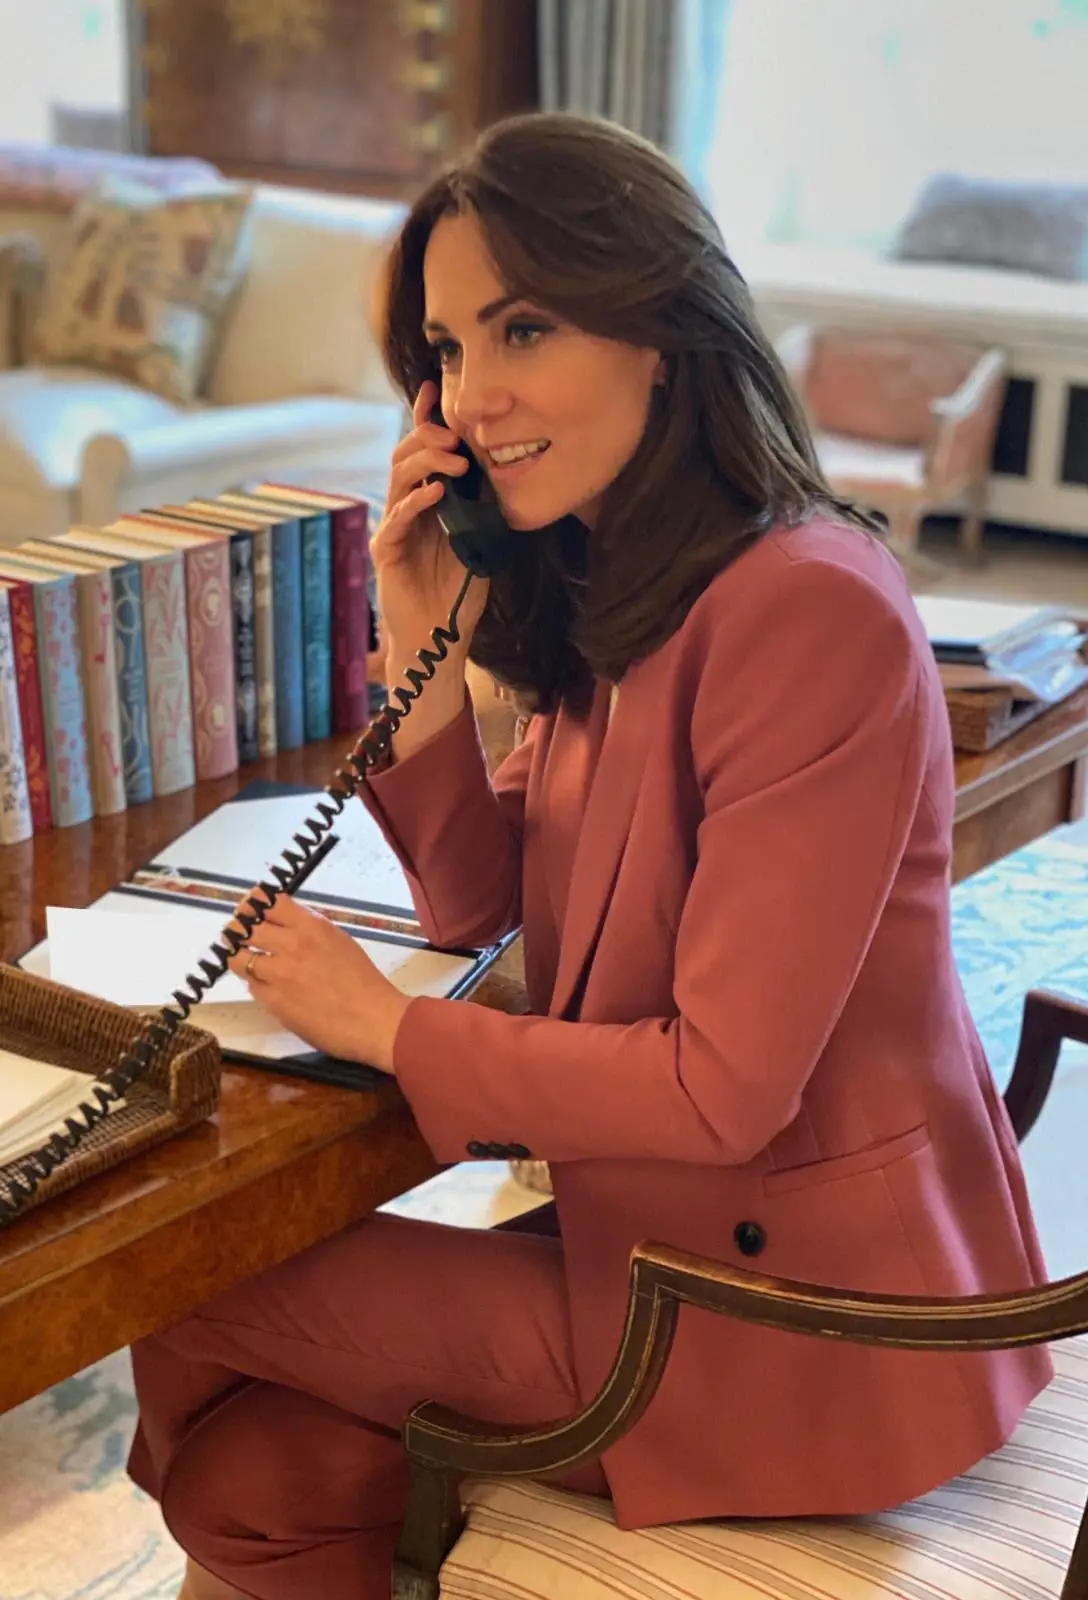 Duchess of Cambridge is Working from Home amid Corona Outbreak